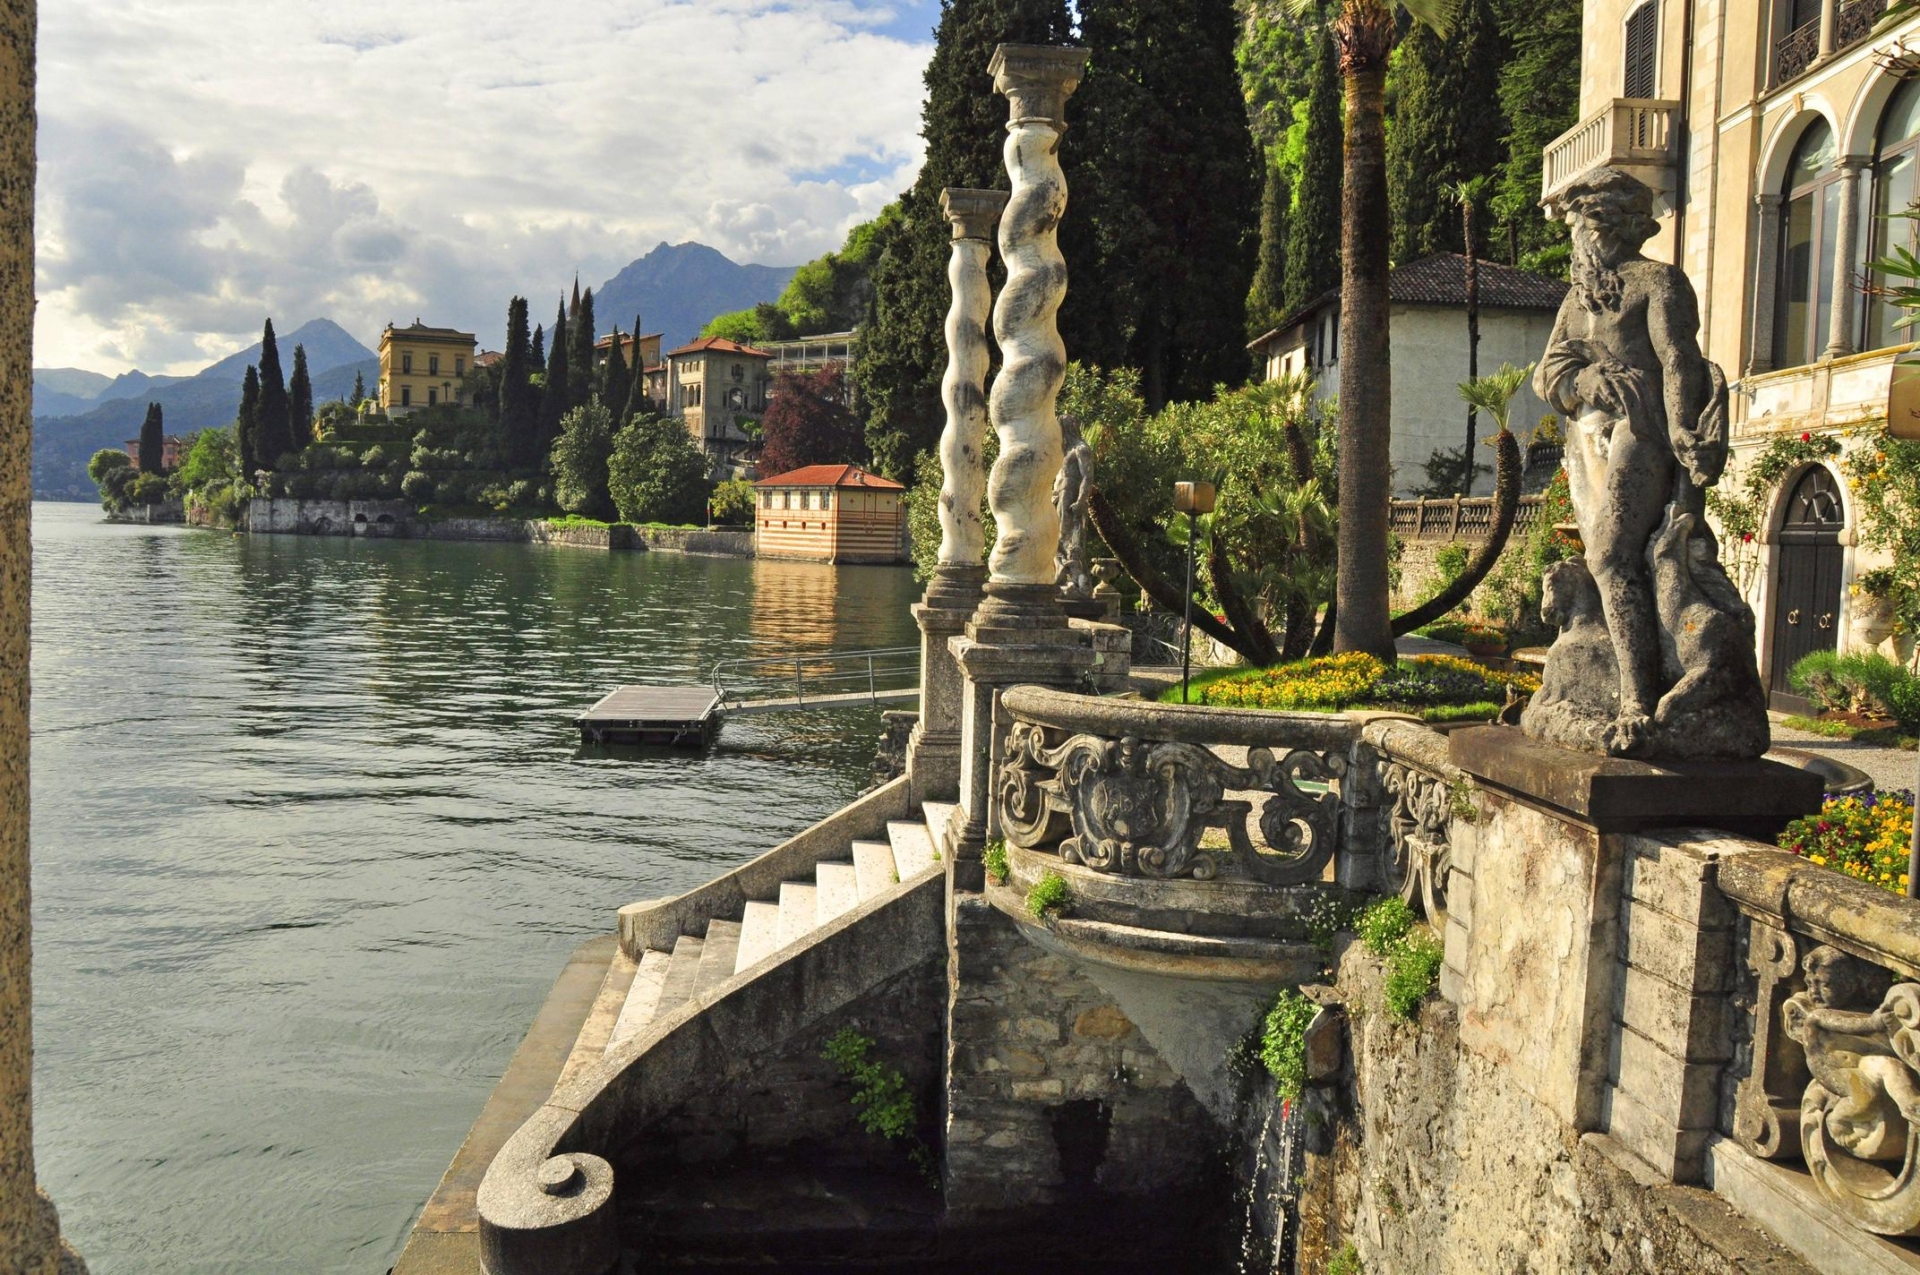 The charming, picturesque villages are enhanced by the stunning nature surrounding the lake.